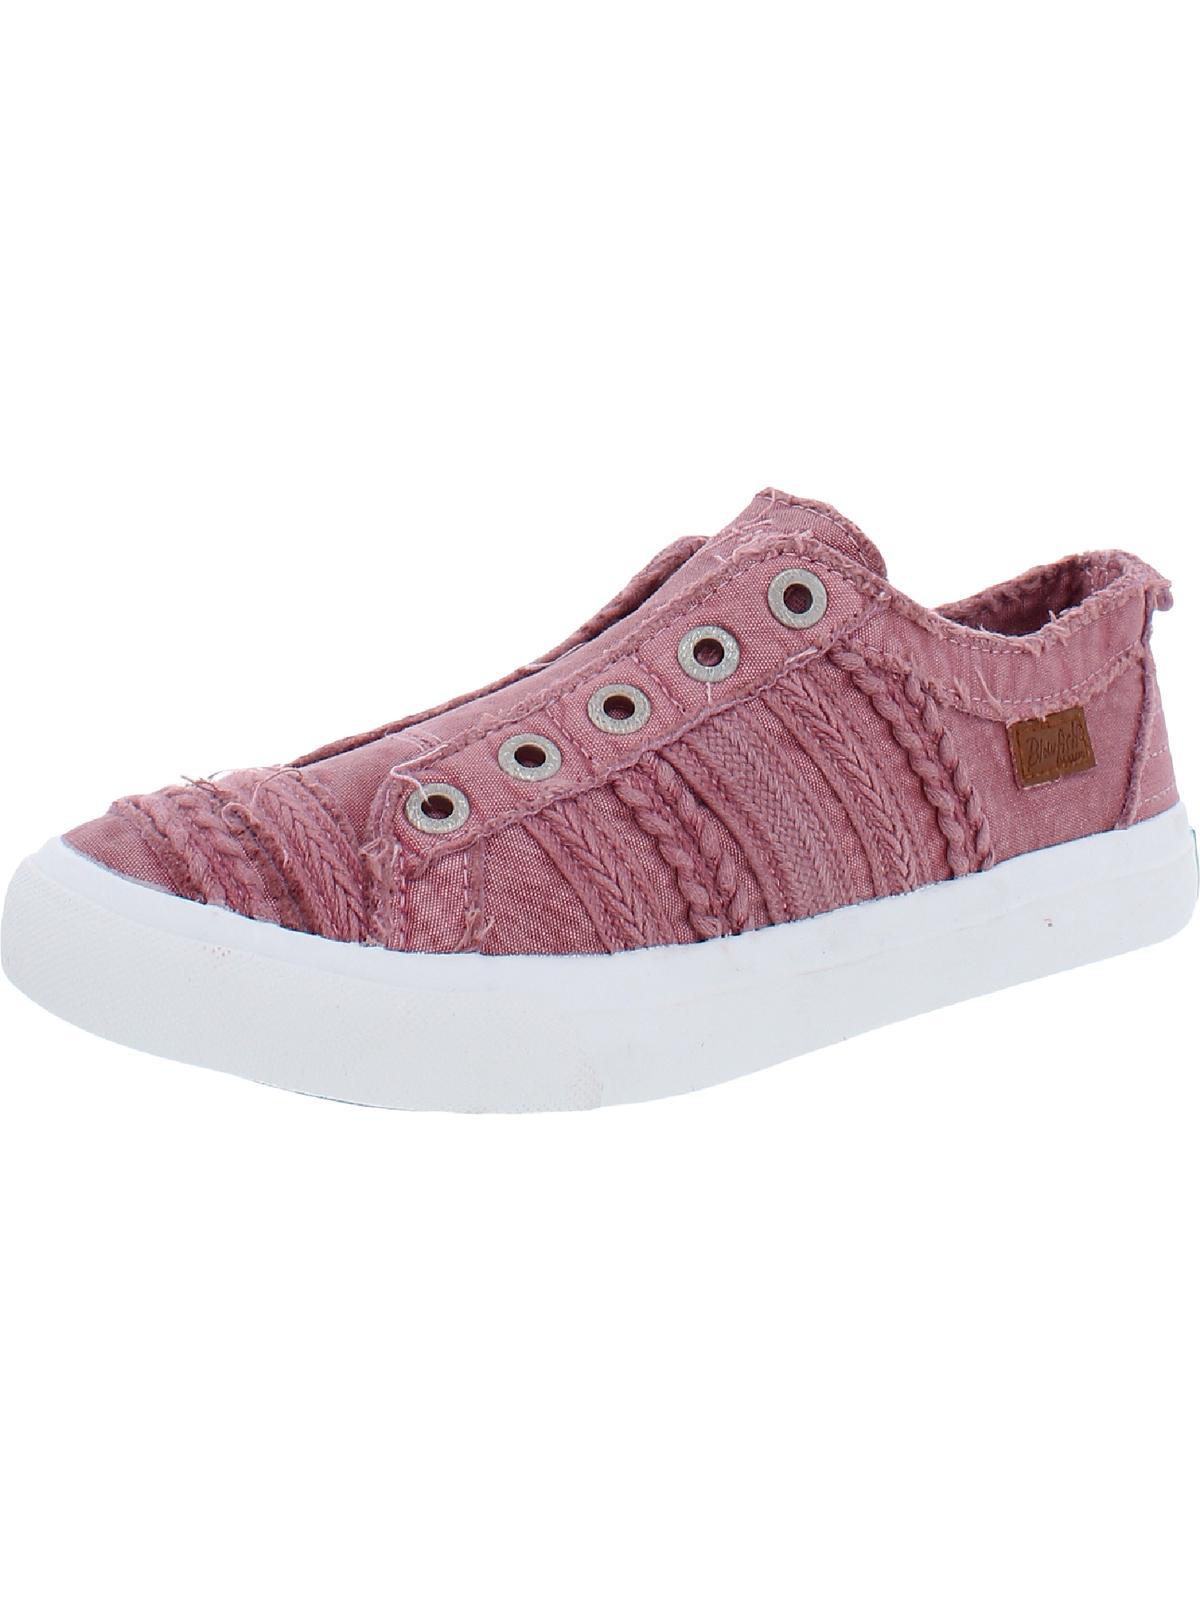 Blowfish Parlane Canvas Embroidered Slip-on Sneakers in Purple | Lyst